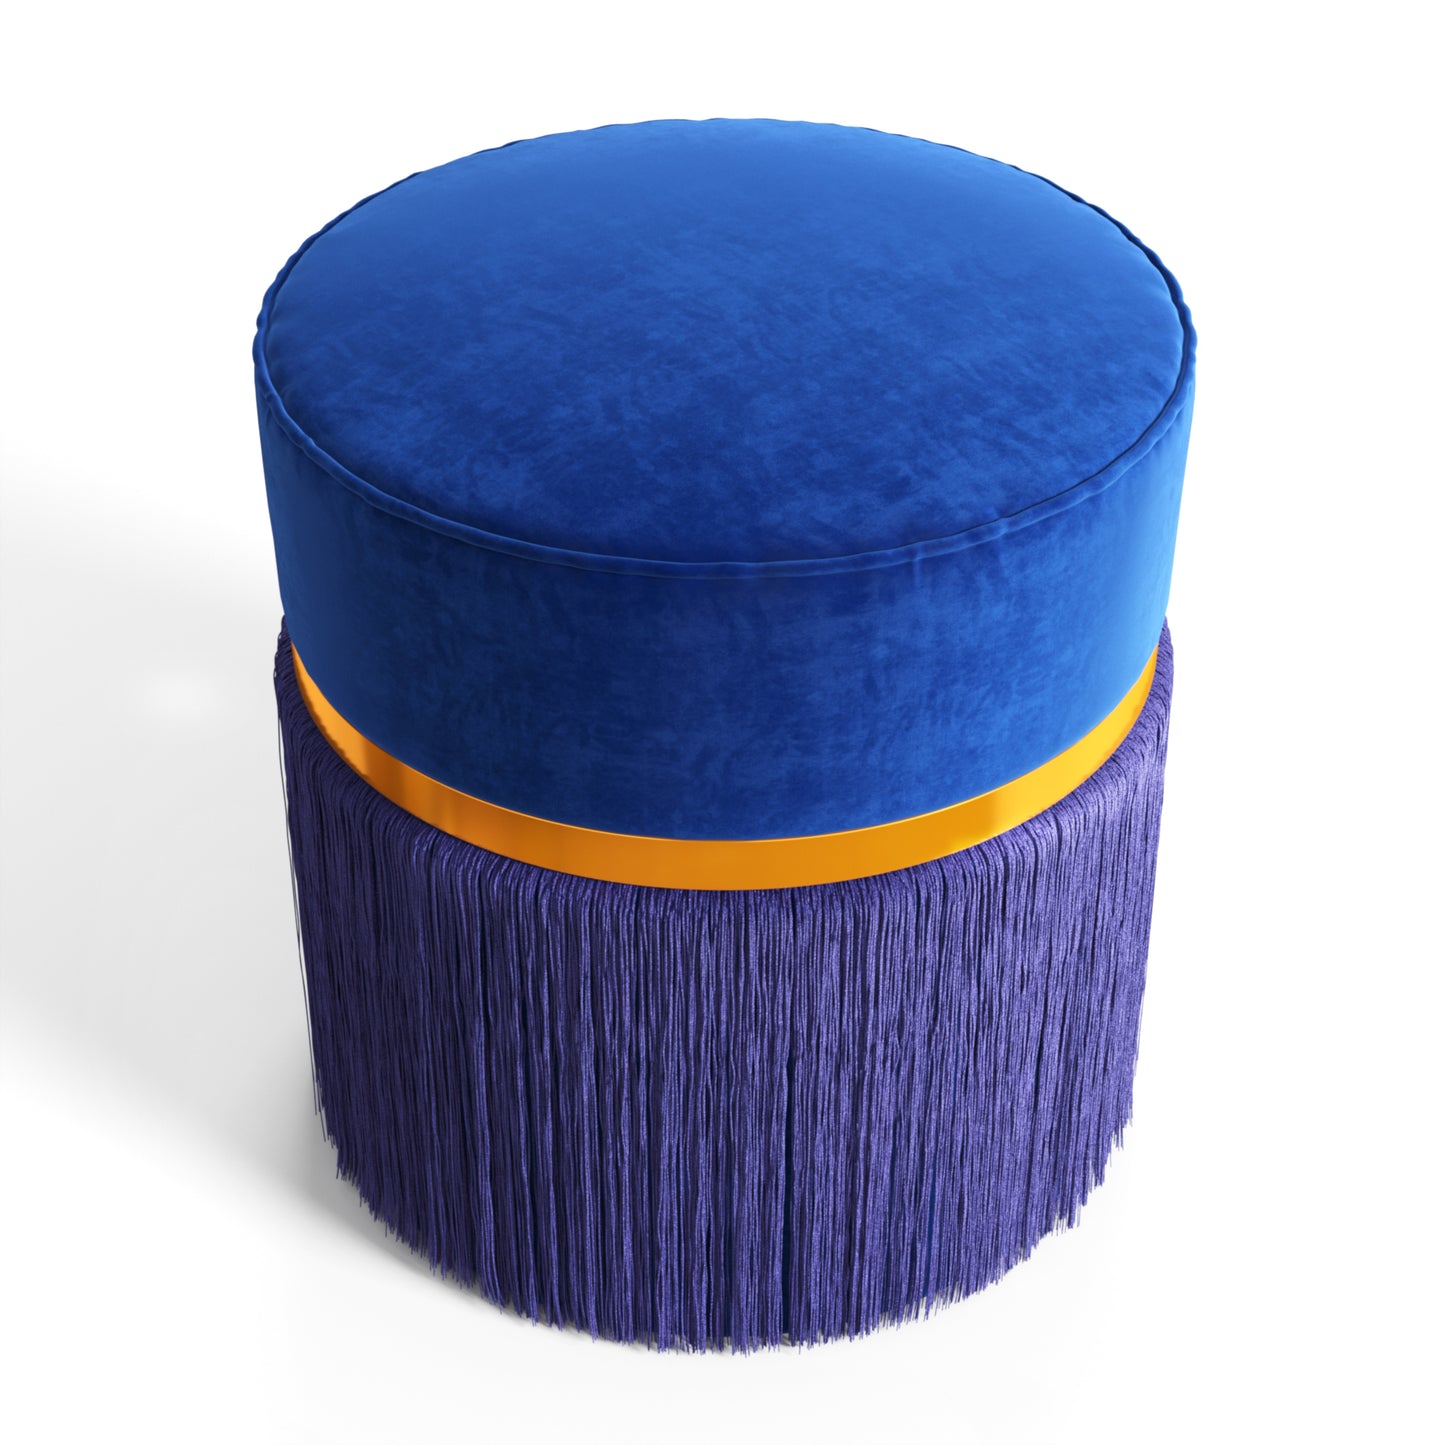 Dolly Fringed Ottoman - Classic Blue